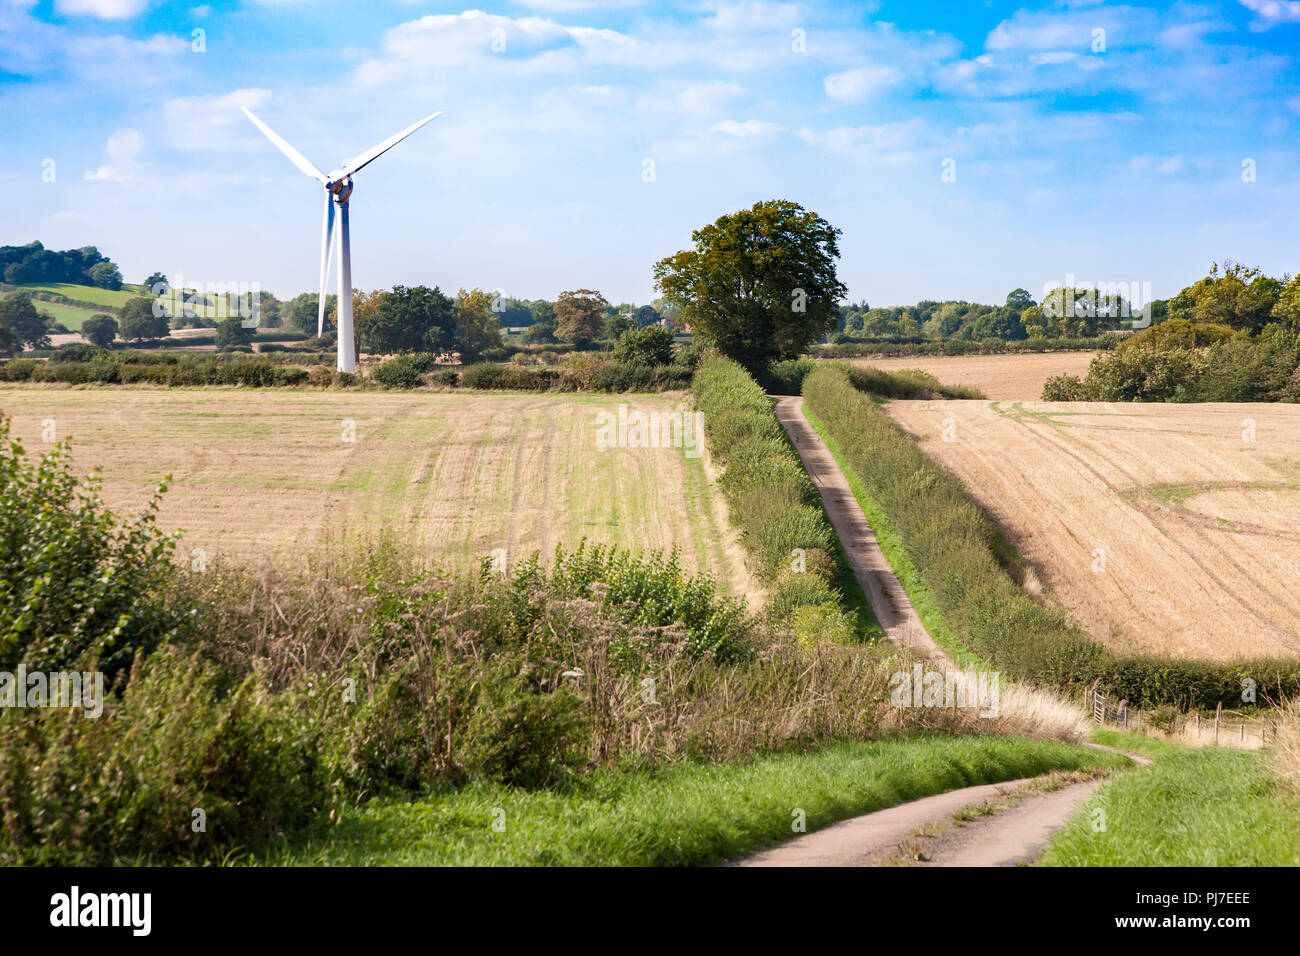 Single wind turbine near Daventry, a market town in Northamptonshire, England, Stock Photo